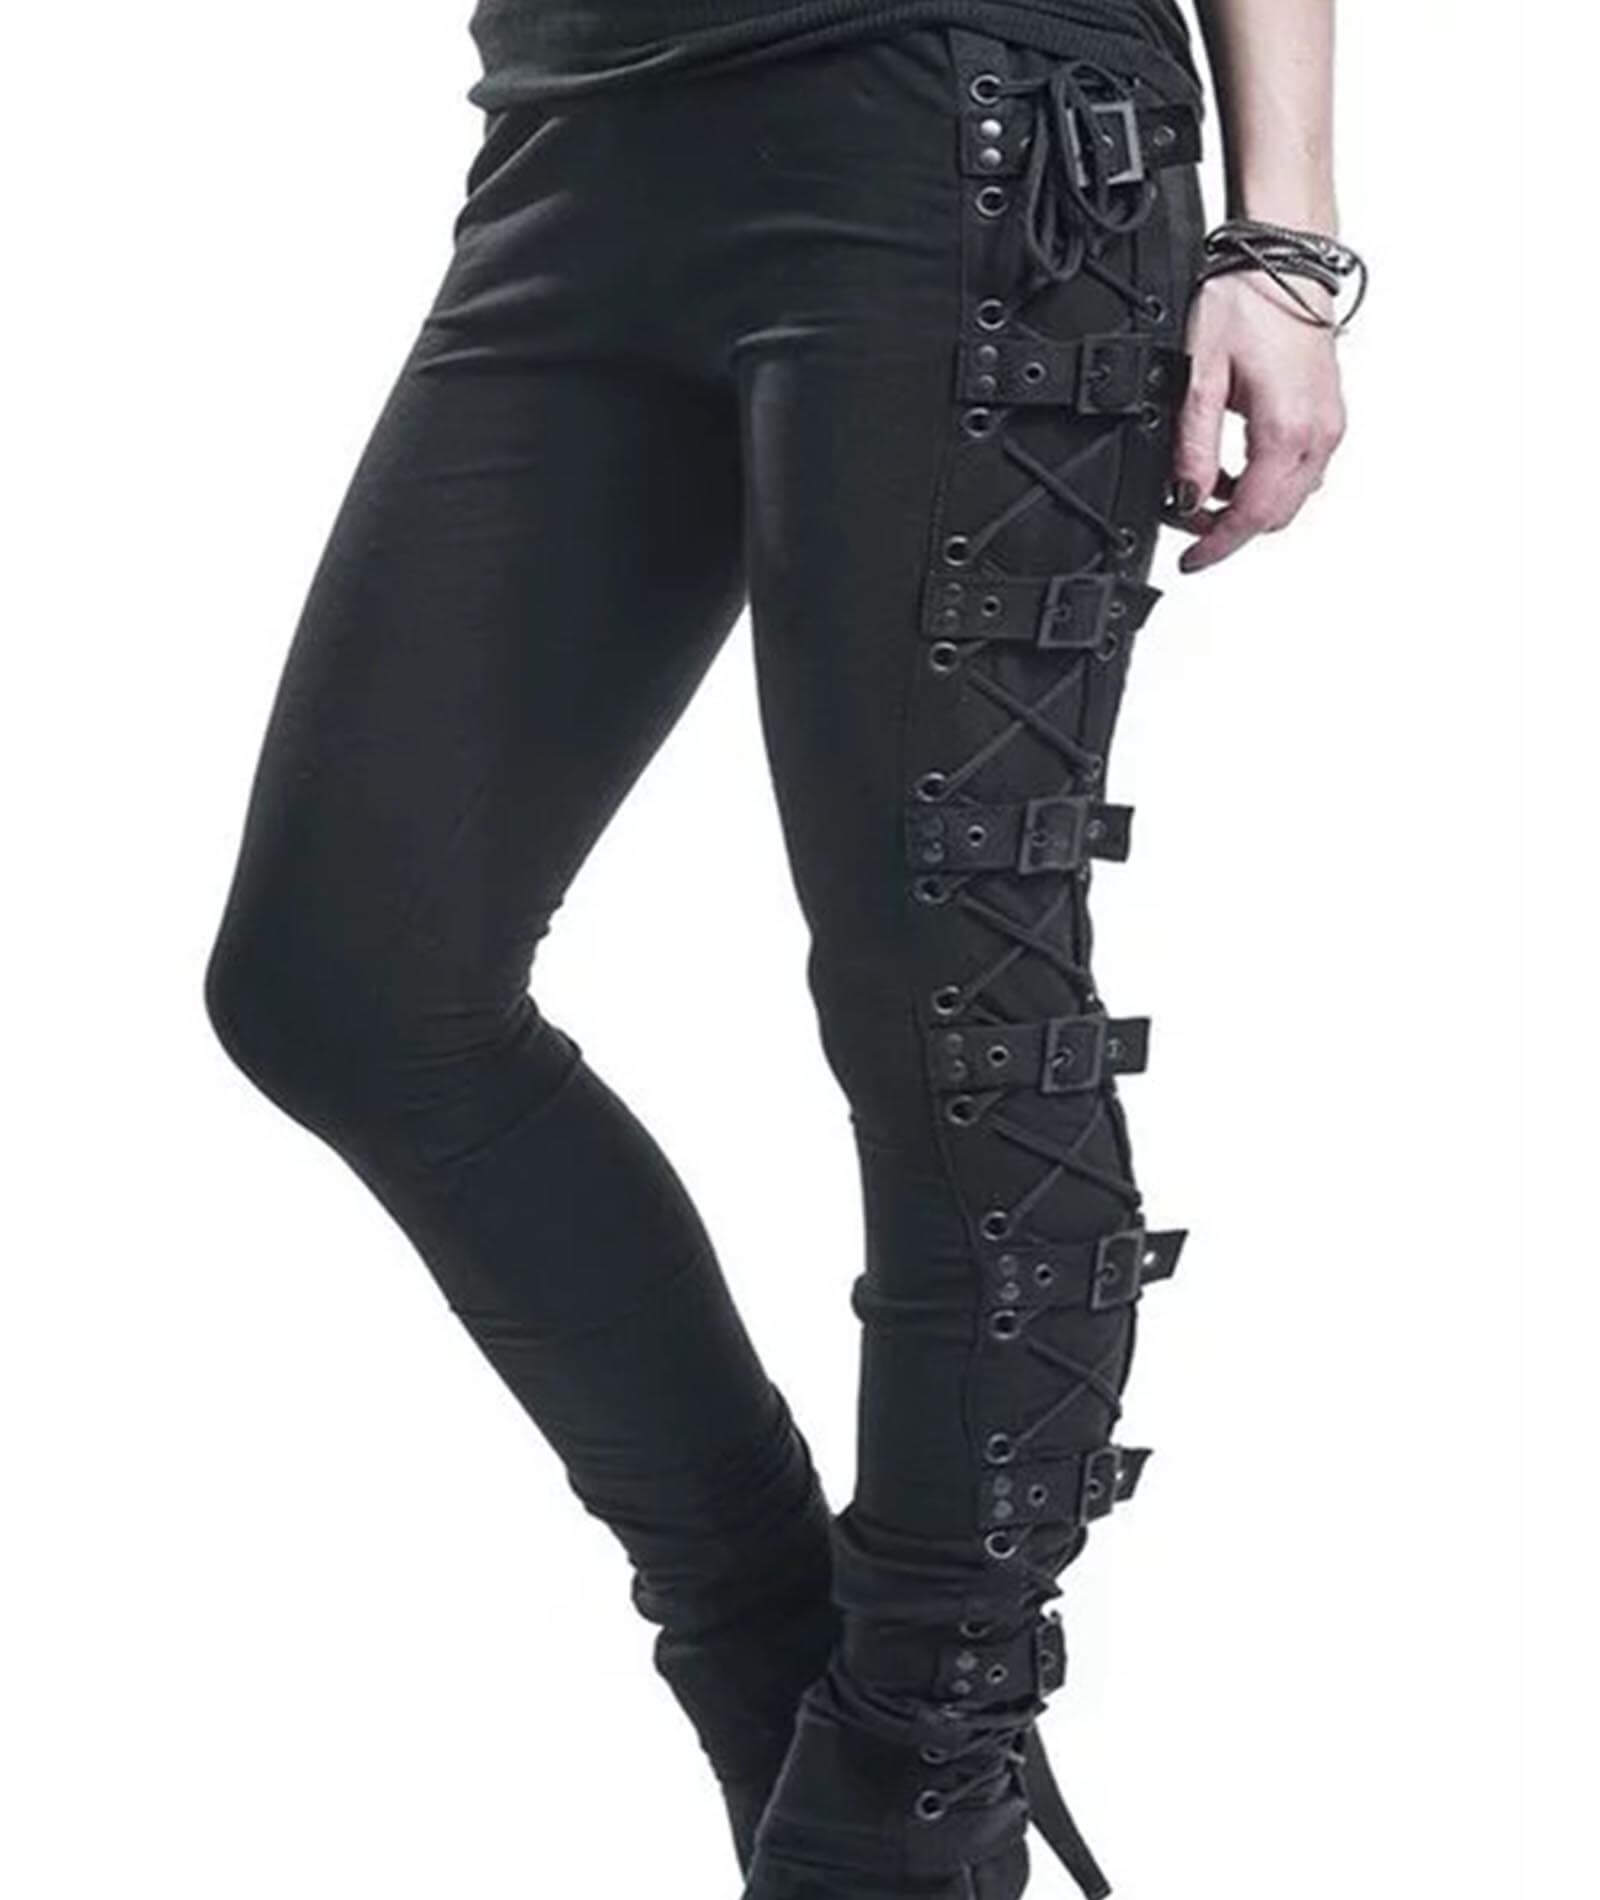  Women's Sexy Black Satin Side Lacing Solid Pants Long Bodycon High Waist Bandage Slim Thick Lace Up Leggings